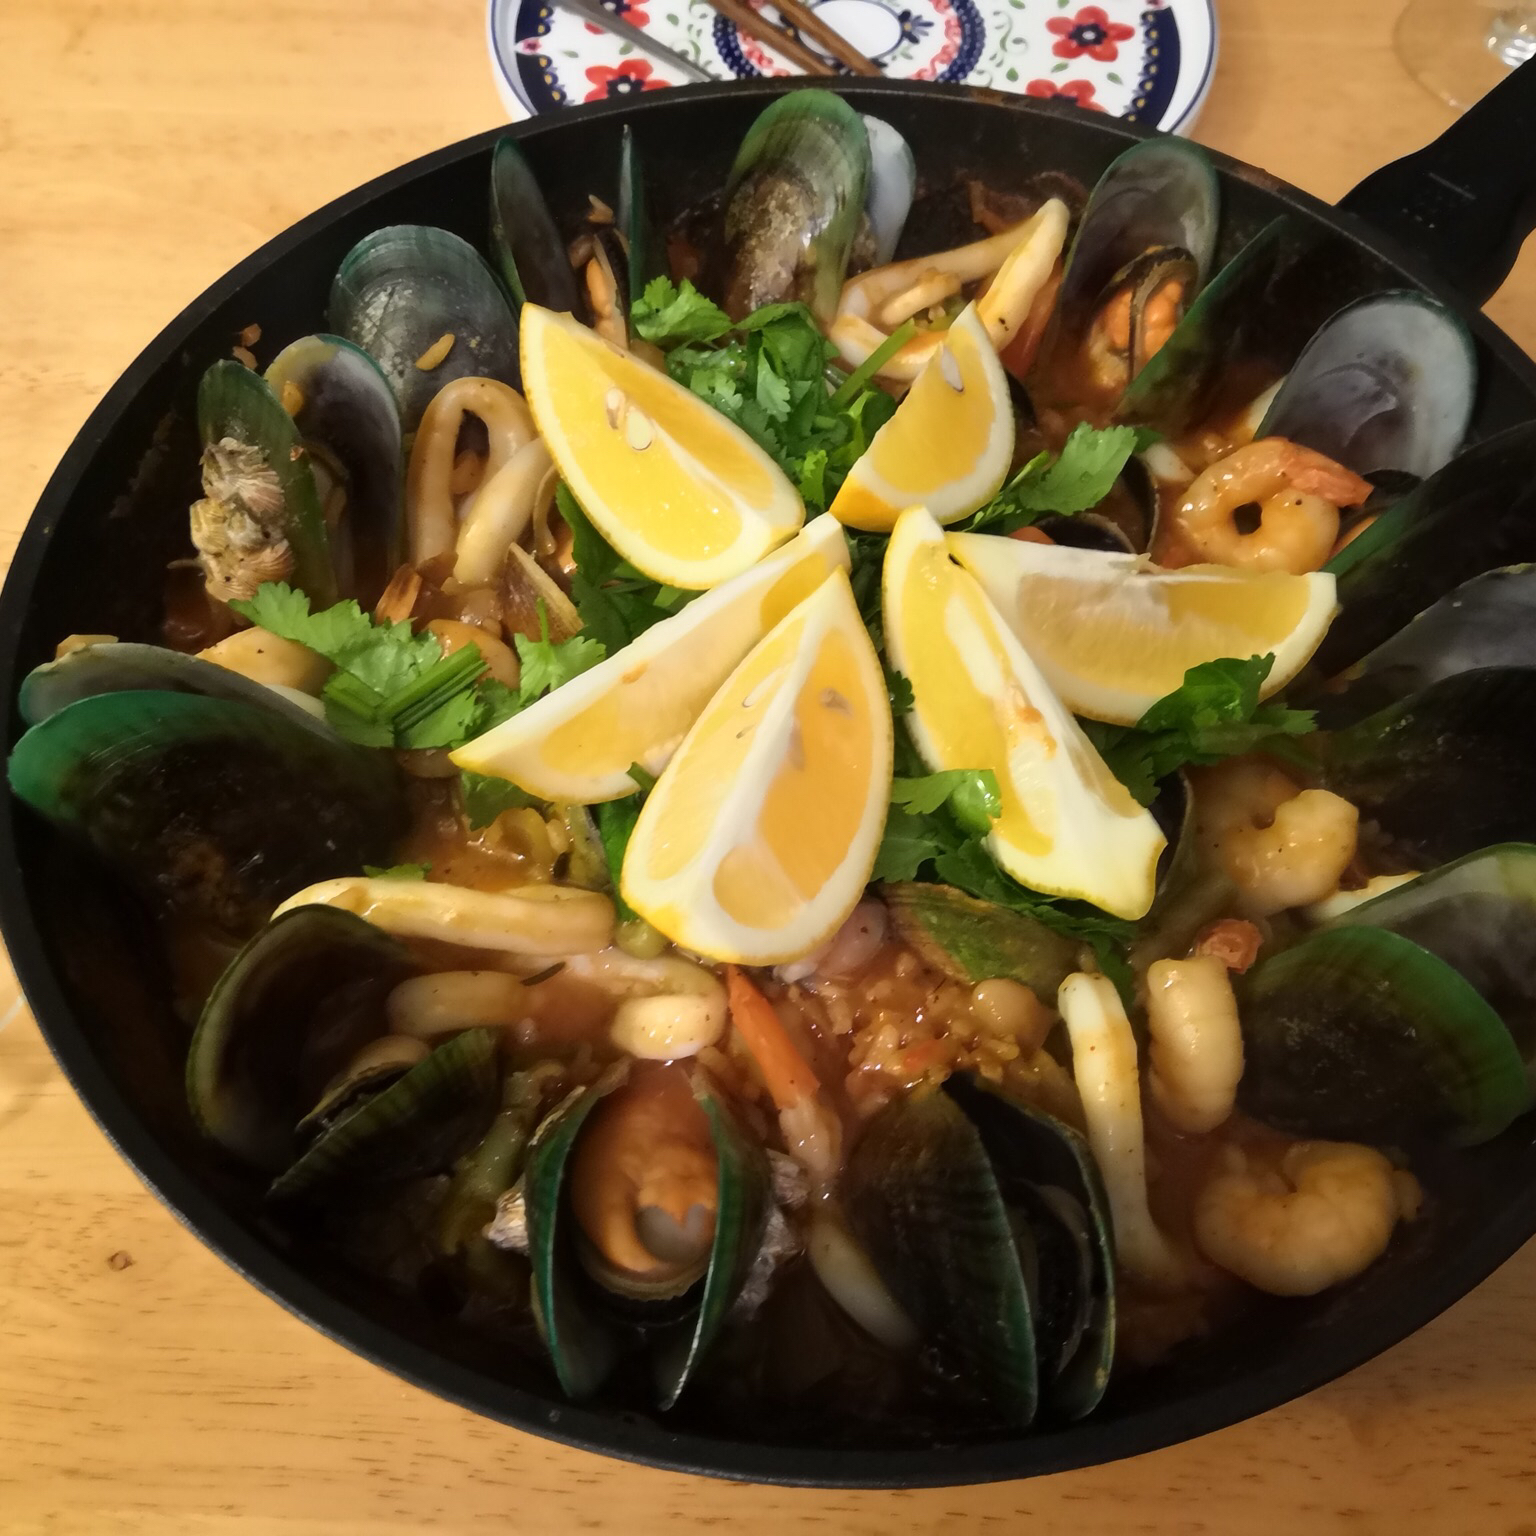 Authentic Seafood Paella